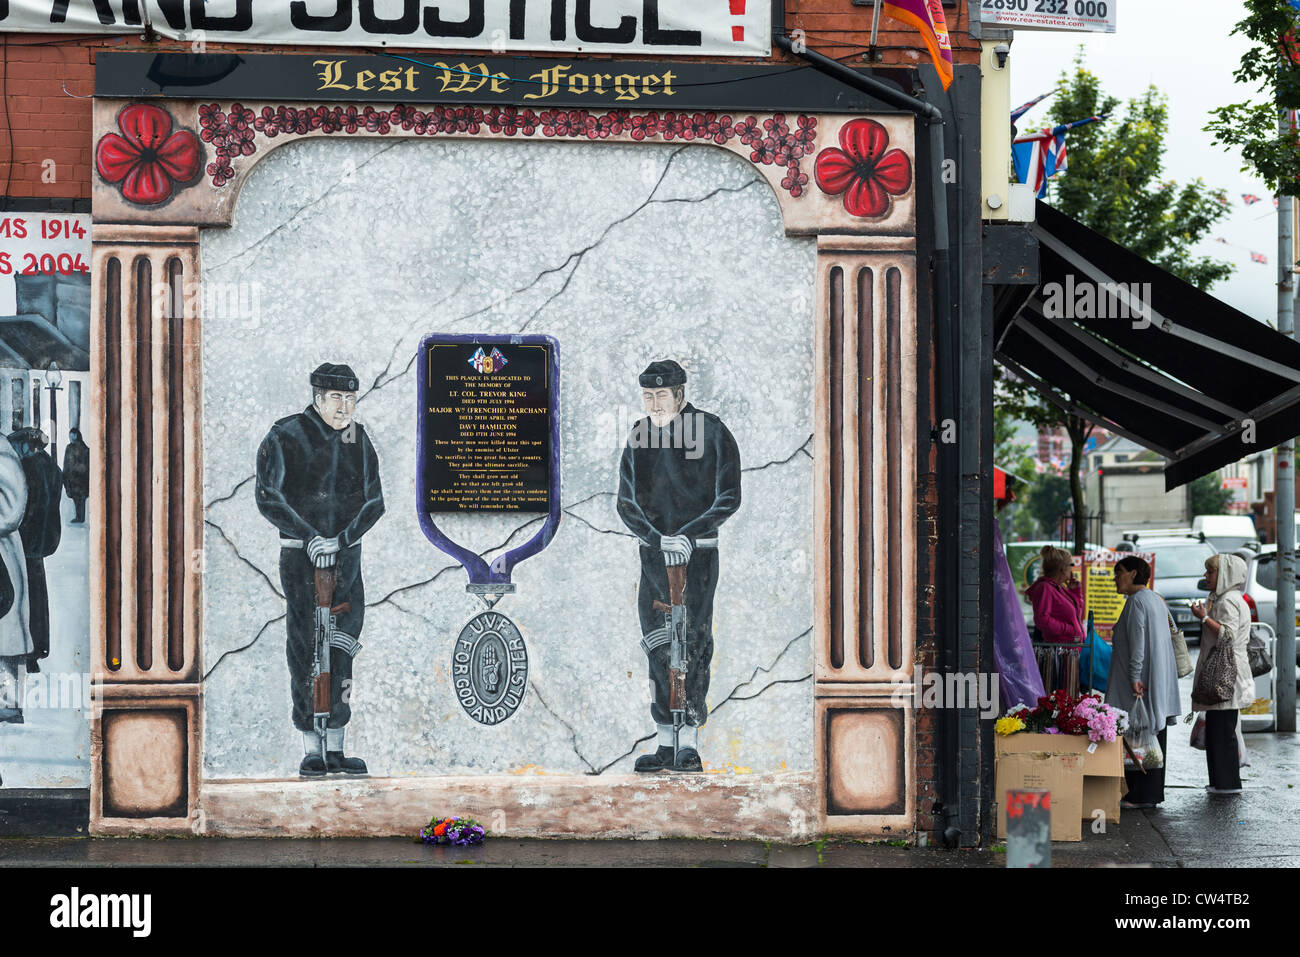 Local people at grocers with Political mural on Shankill road, Belfast in Northern Ireland. Stock Photo